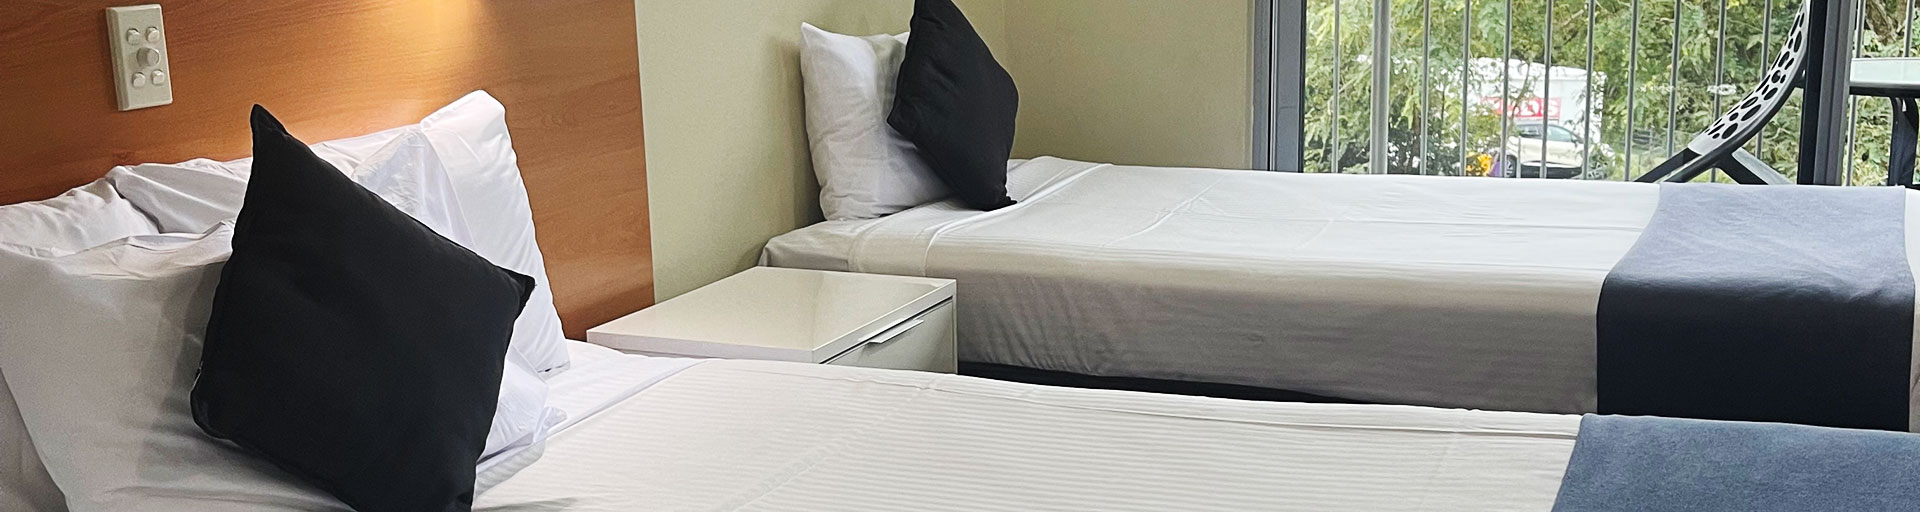 Nambour Heights Motel Queen + Single Self Contained Room